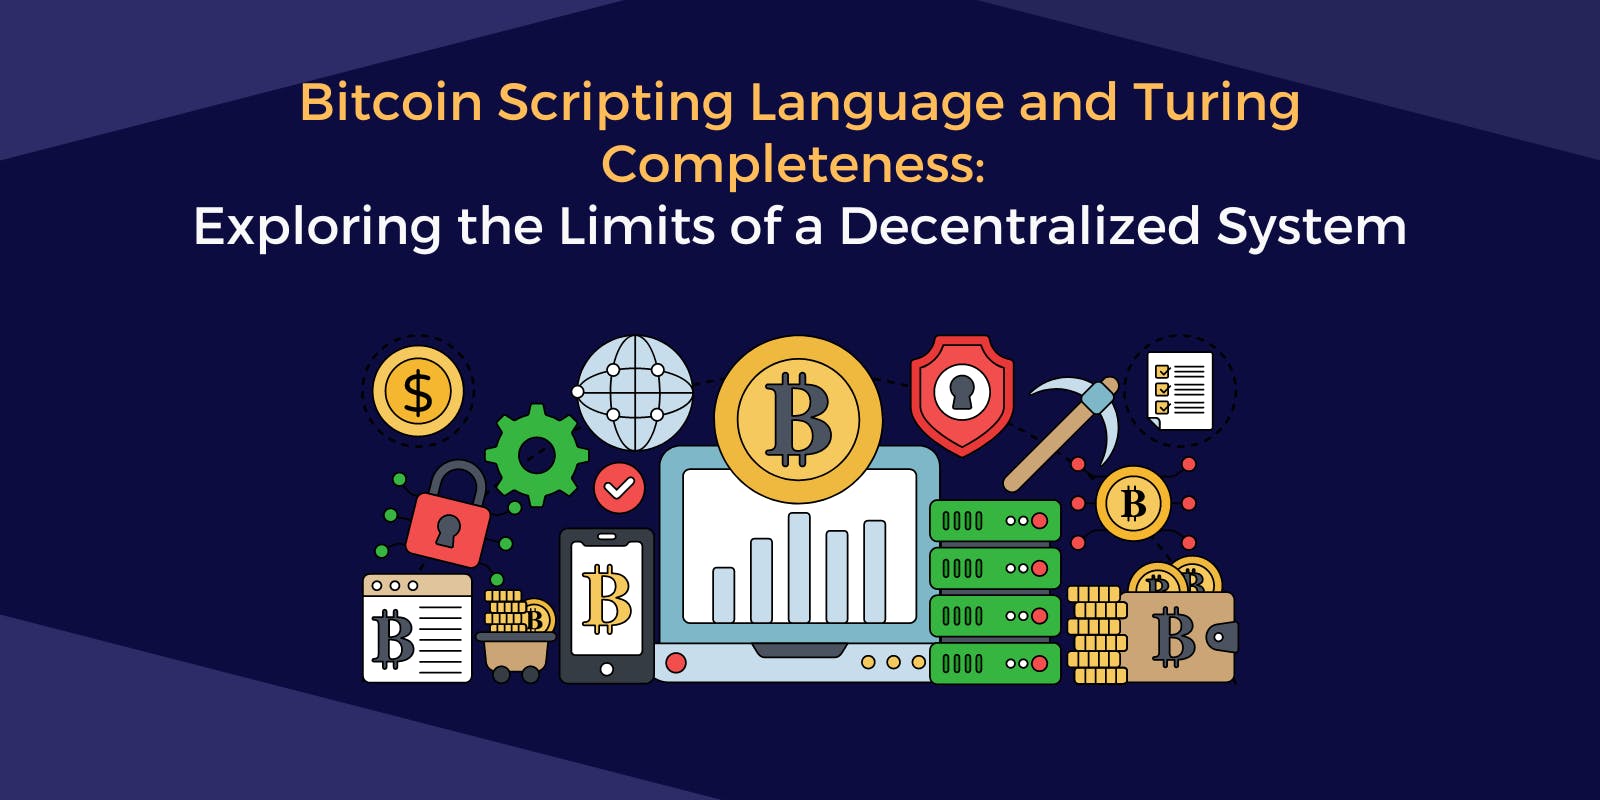 Bitcoin Scripting Language and Turing Completeness: Exploring the Limits of a Decentralized System